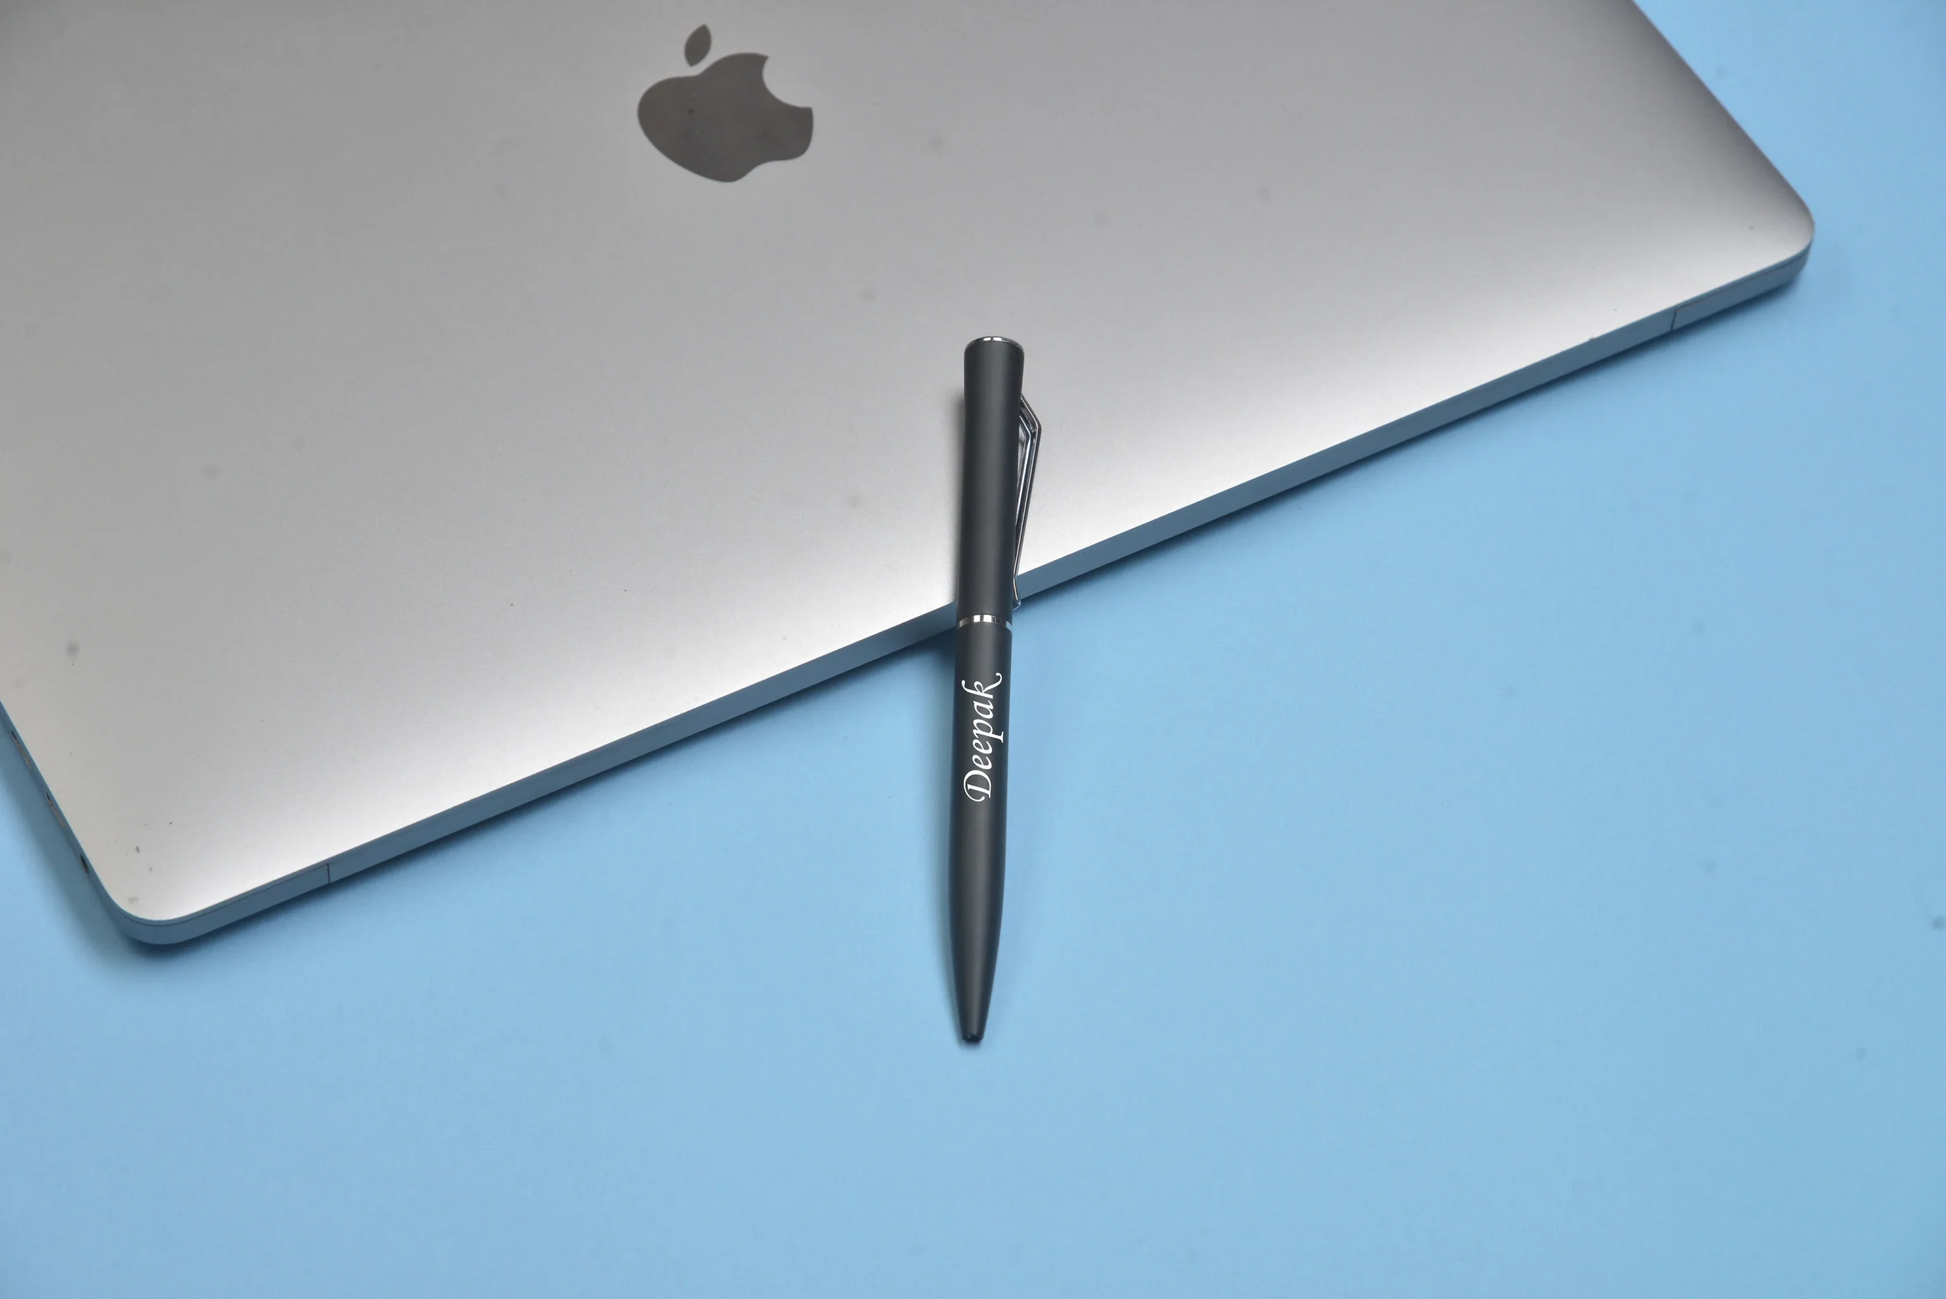 "Get the job done with our durable and reliable pen. A must-have for professionals, students, and busy individuals."